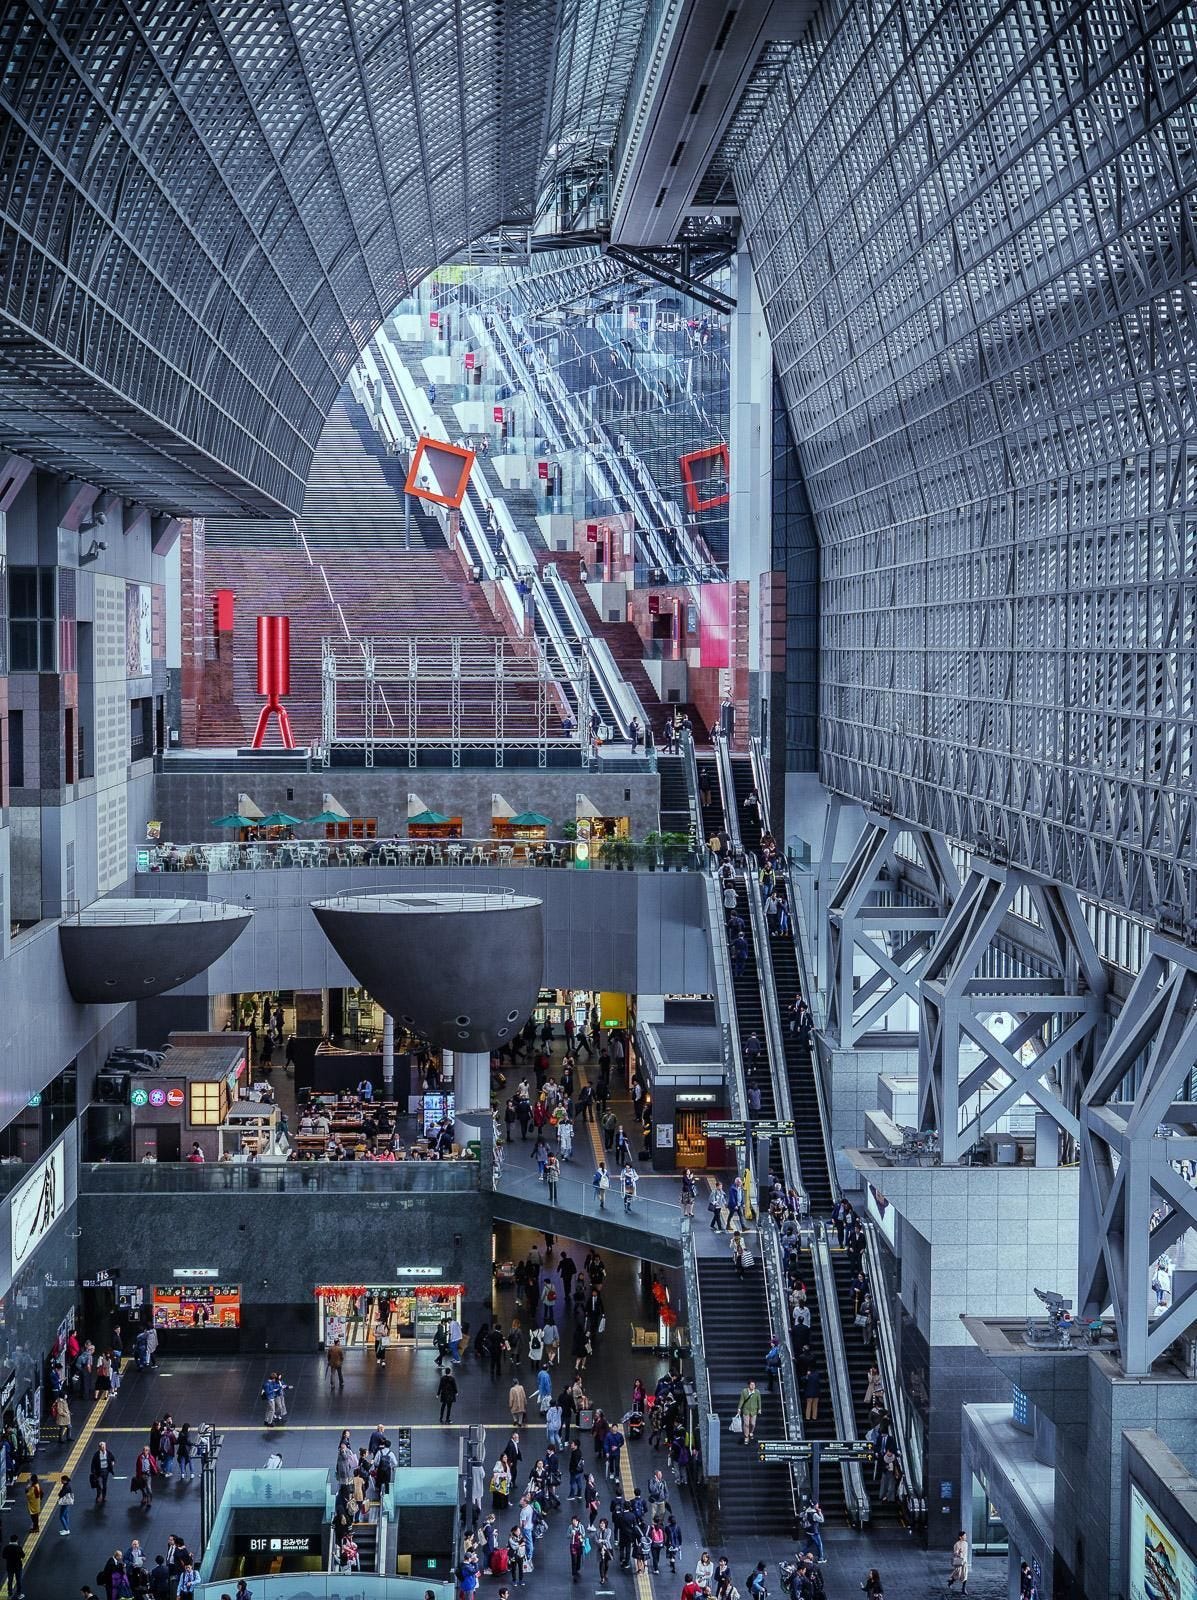 Entry hall of Kyoto Station, Japan : r/InfrastructurePorn